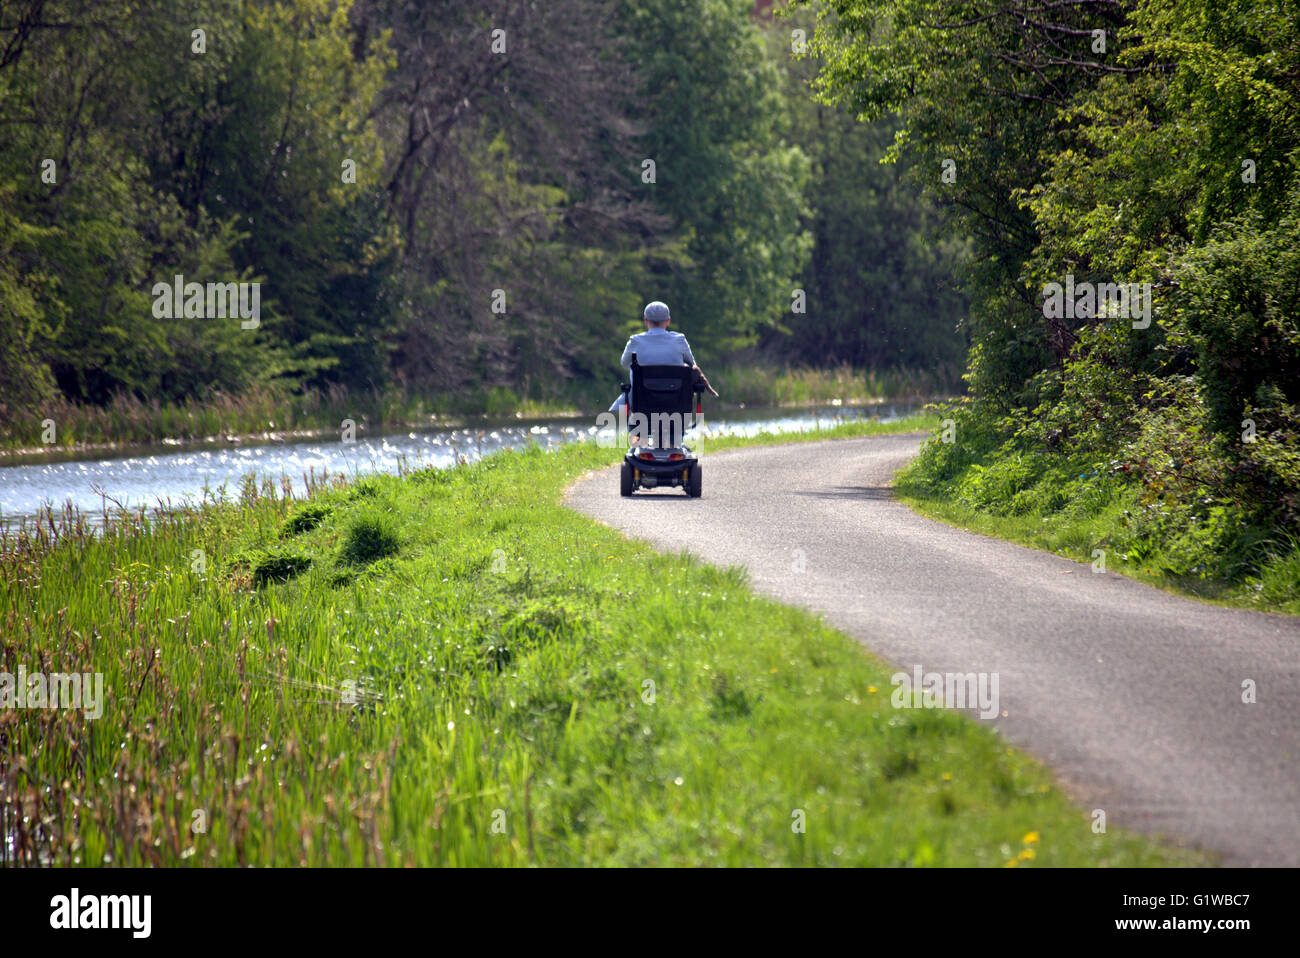 Man on invalid car  on towpath on the Forth and Clyde canal, Glasgow, Scotland, UK. Stock Photo